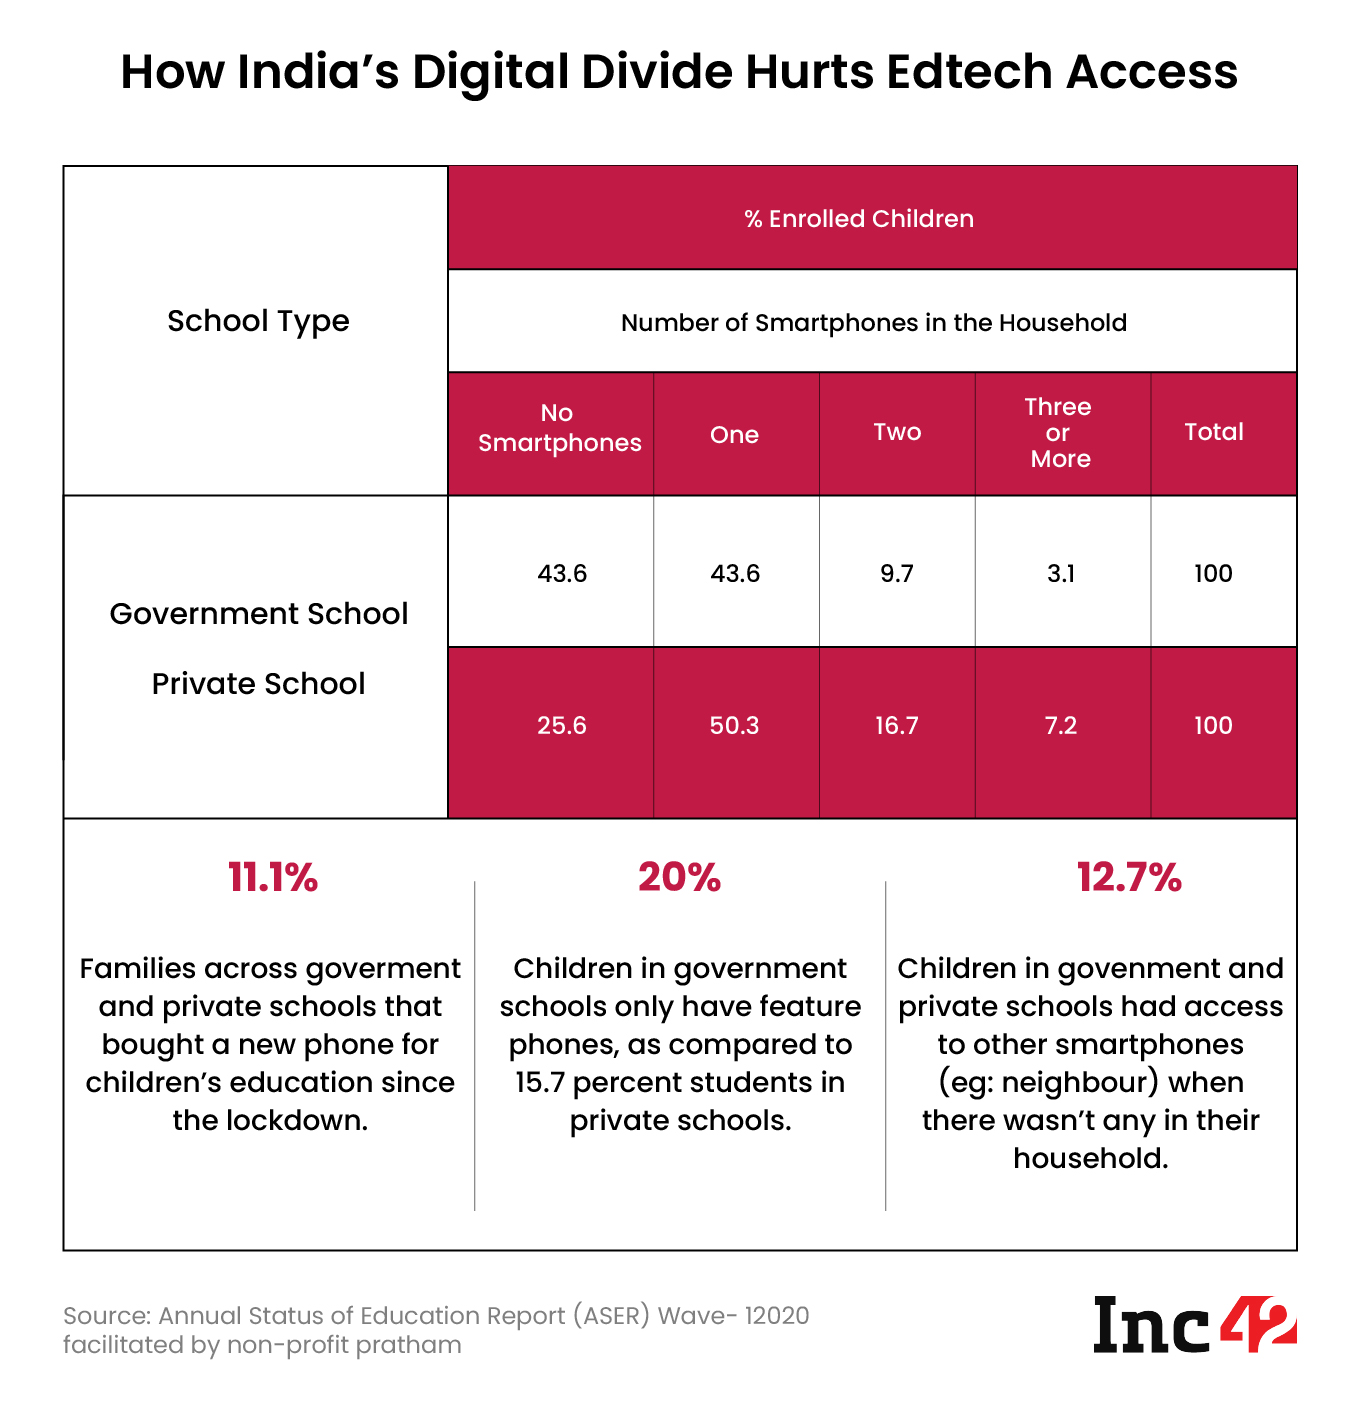 How India's Digital Divide Hurts Edtech Access